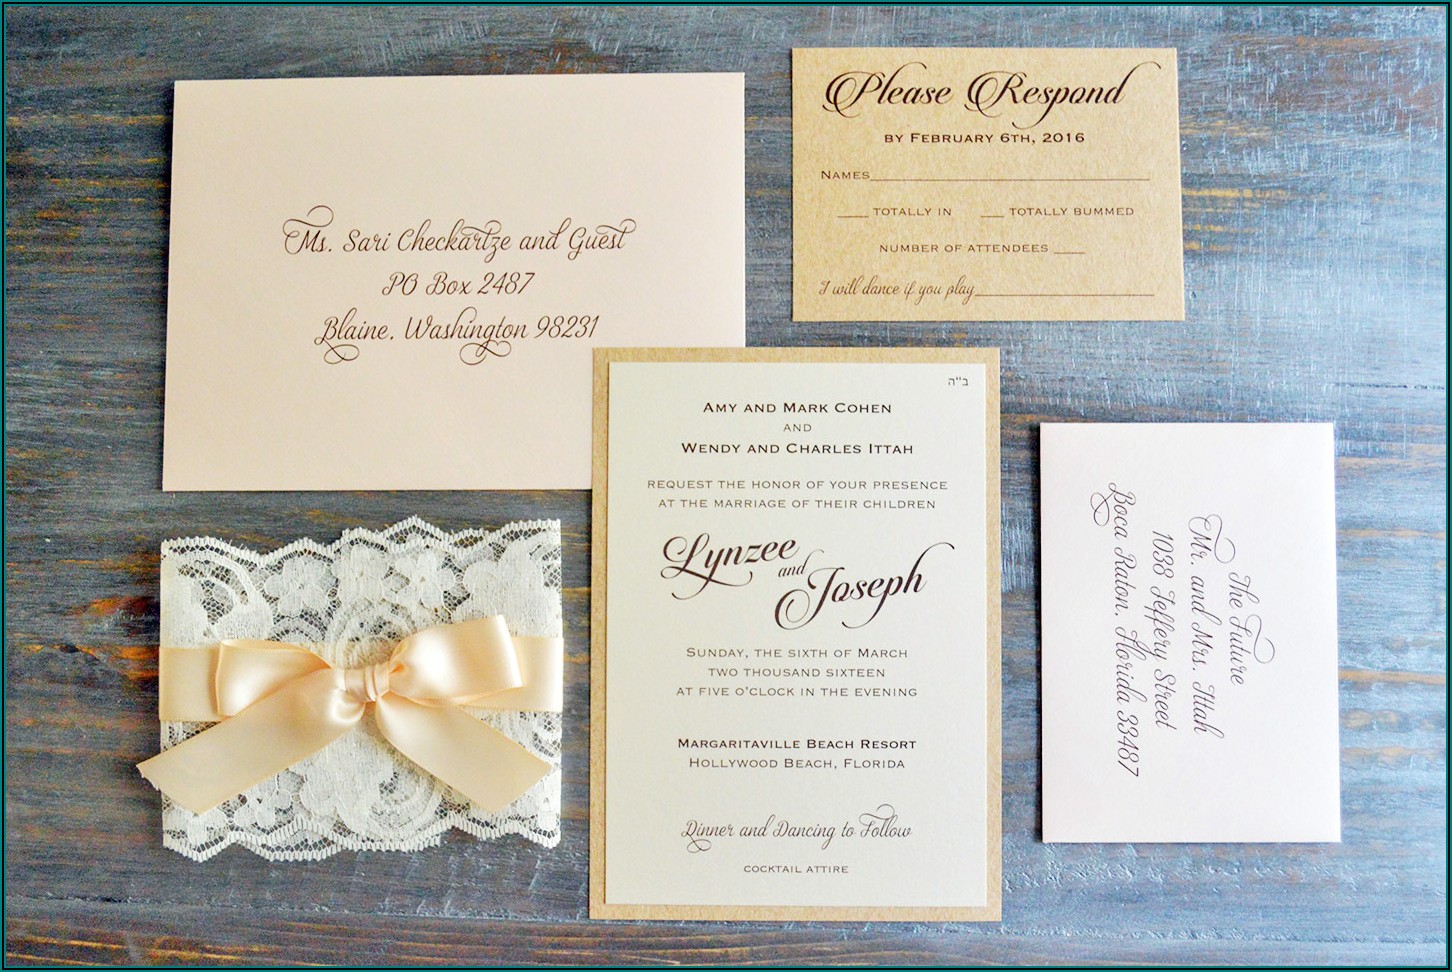 How To Address Wedding Invitations With Only One Envelope